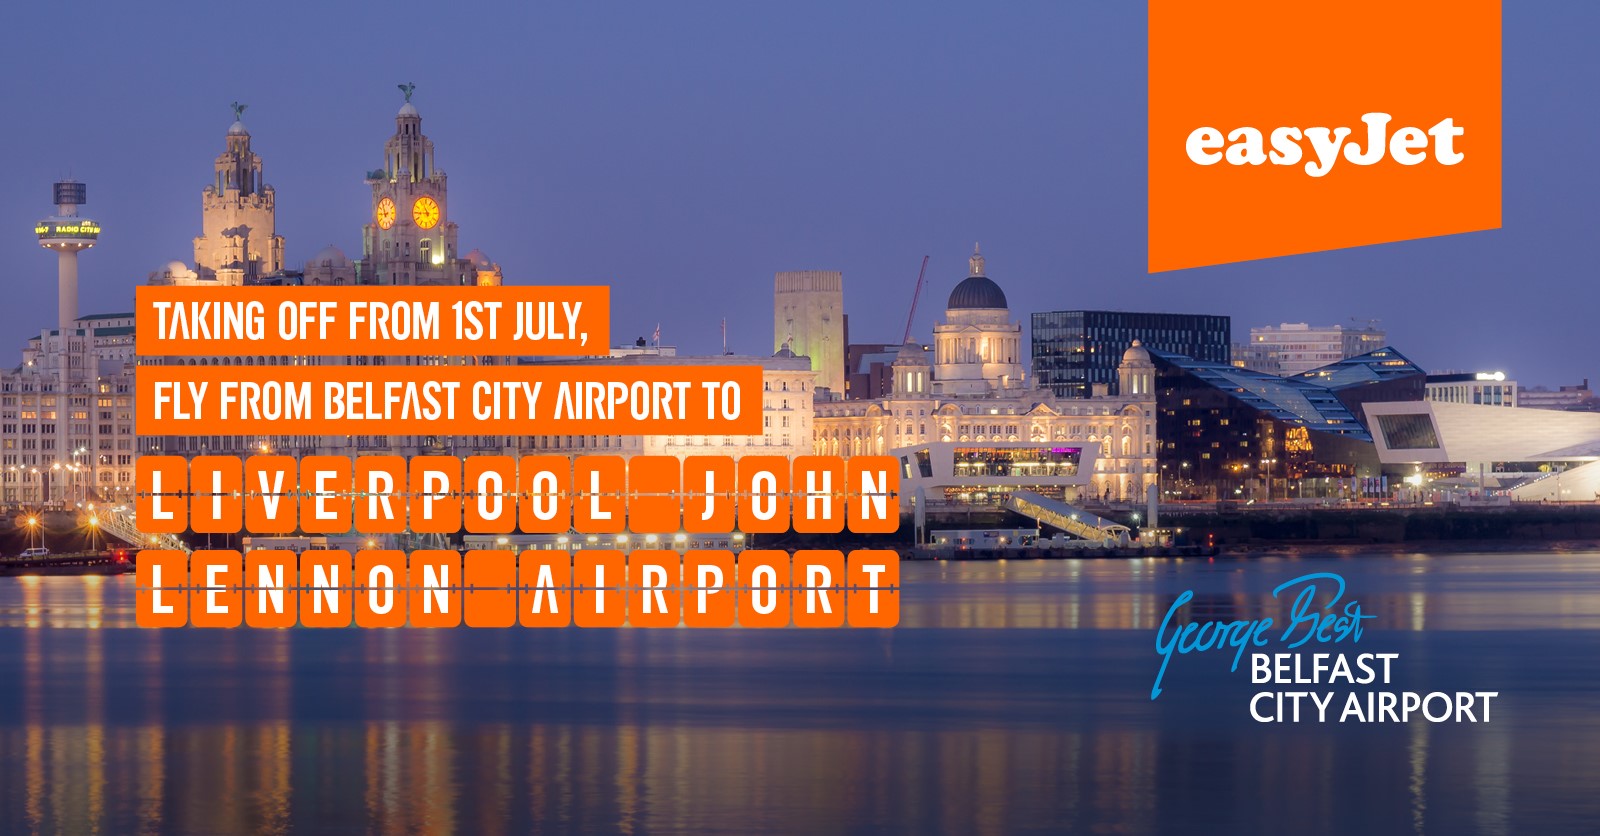 Fly Belfast City to Liverpool from 1st July with easyJet